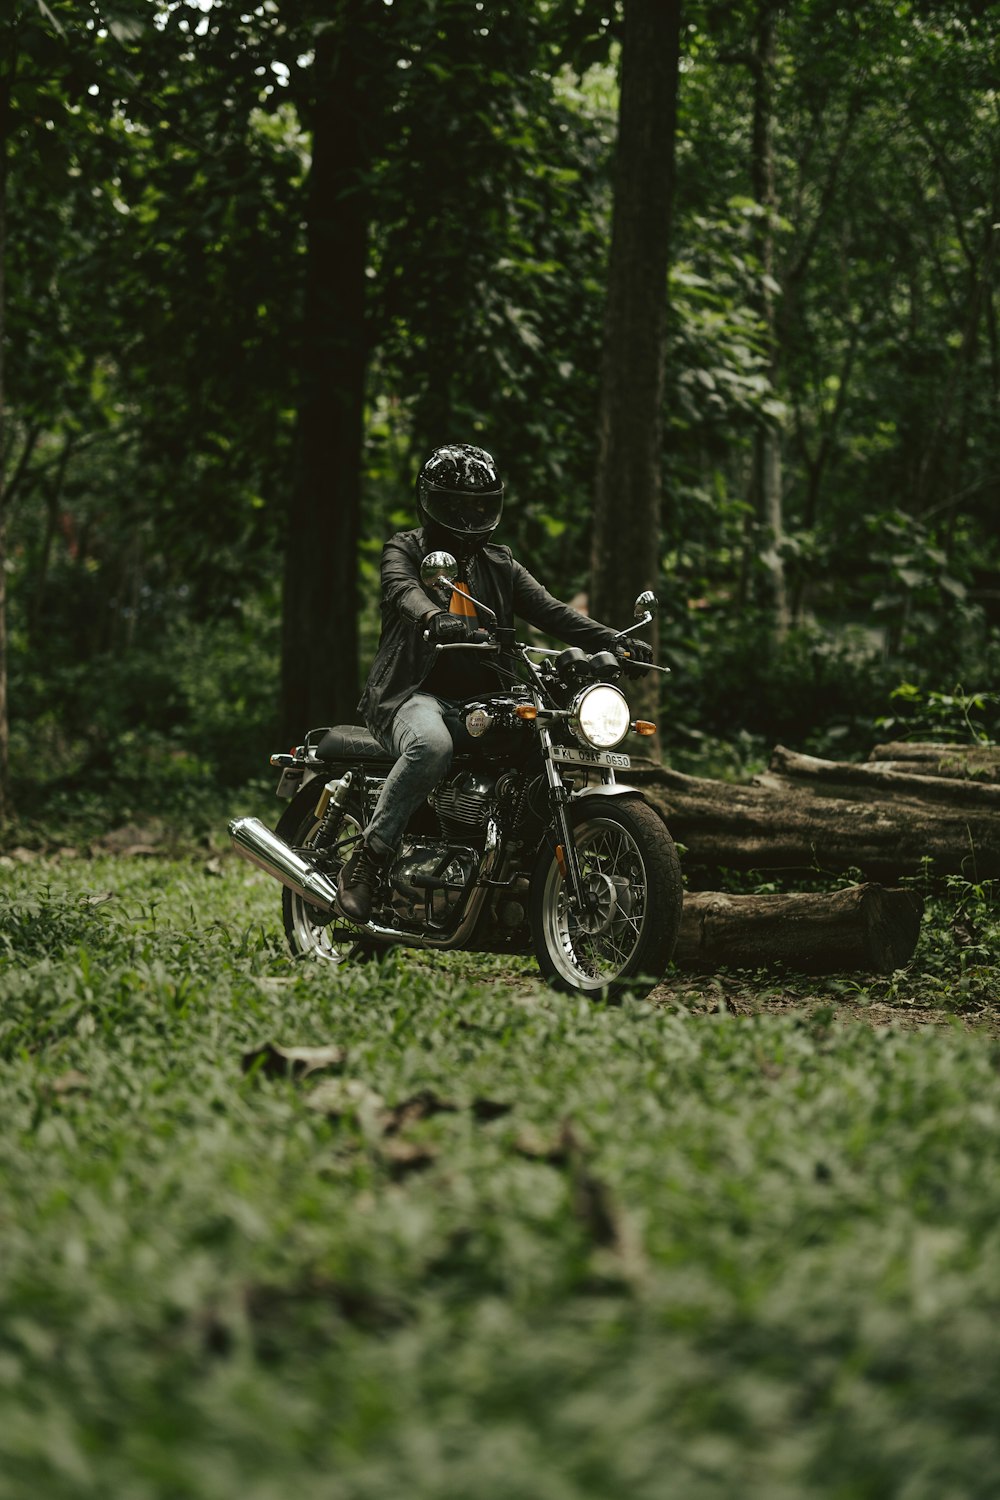 a man riding a motorcycle through a lush green forest